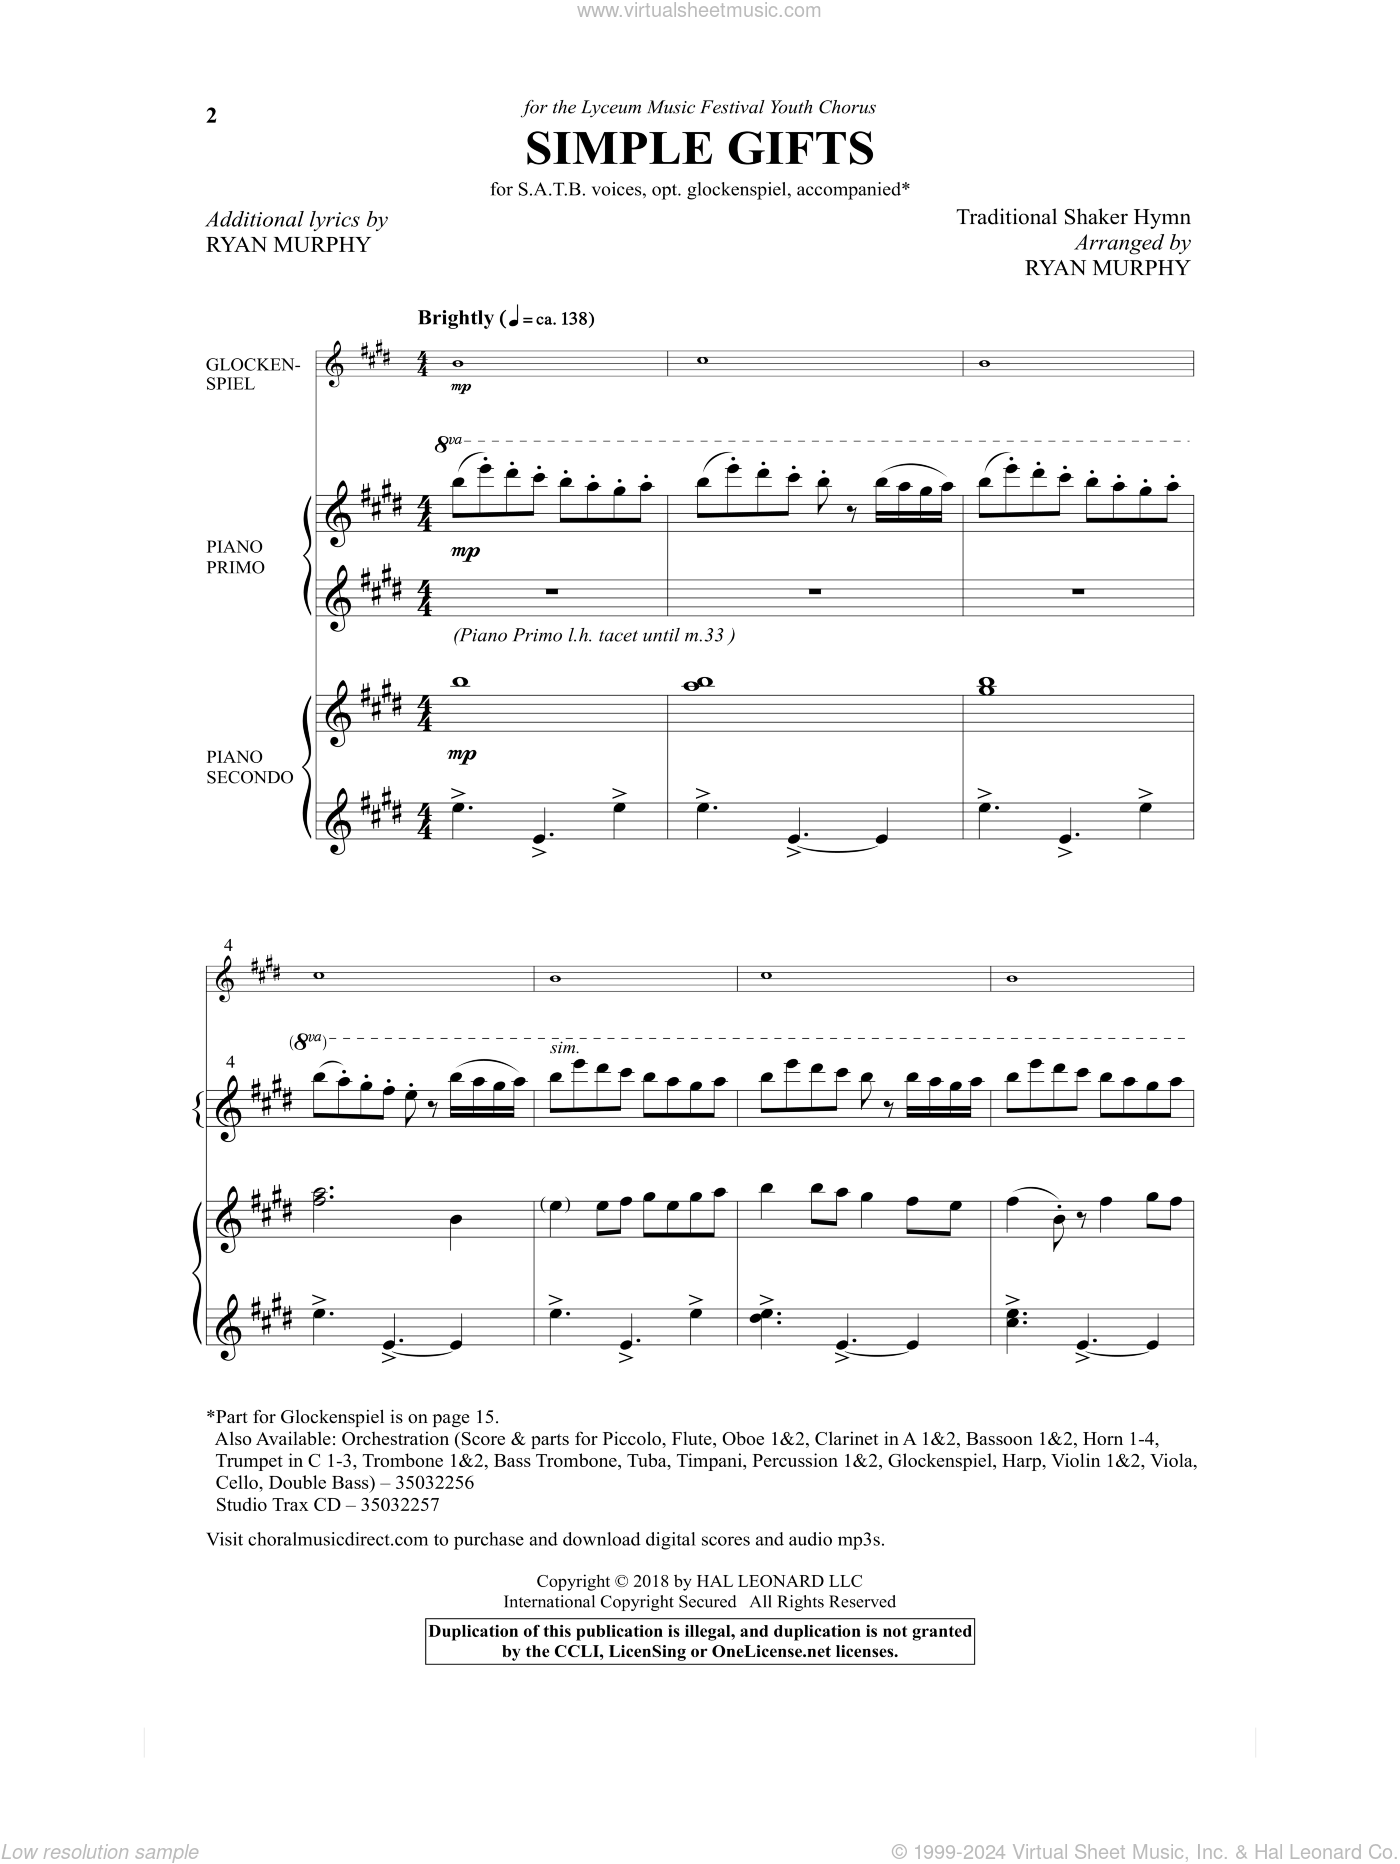 A Simple Gifts Song Sheet with Guitar Chords by ELEG for SBWE